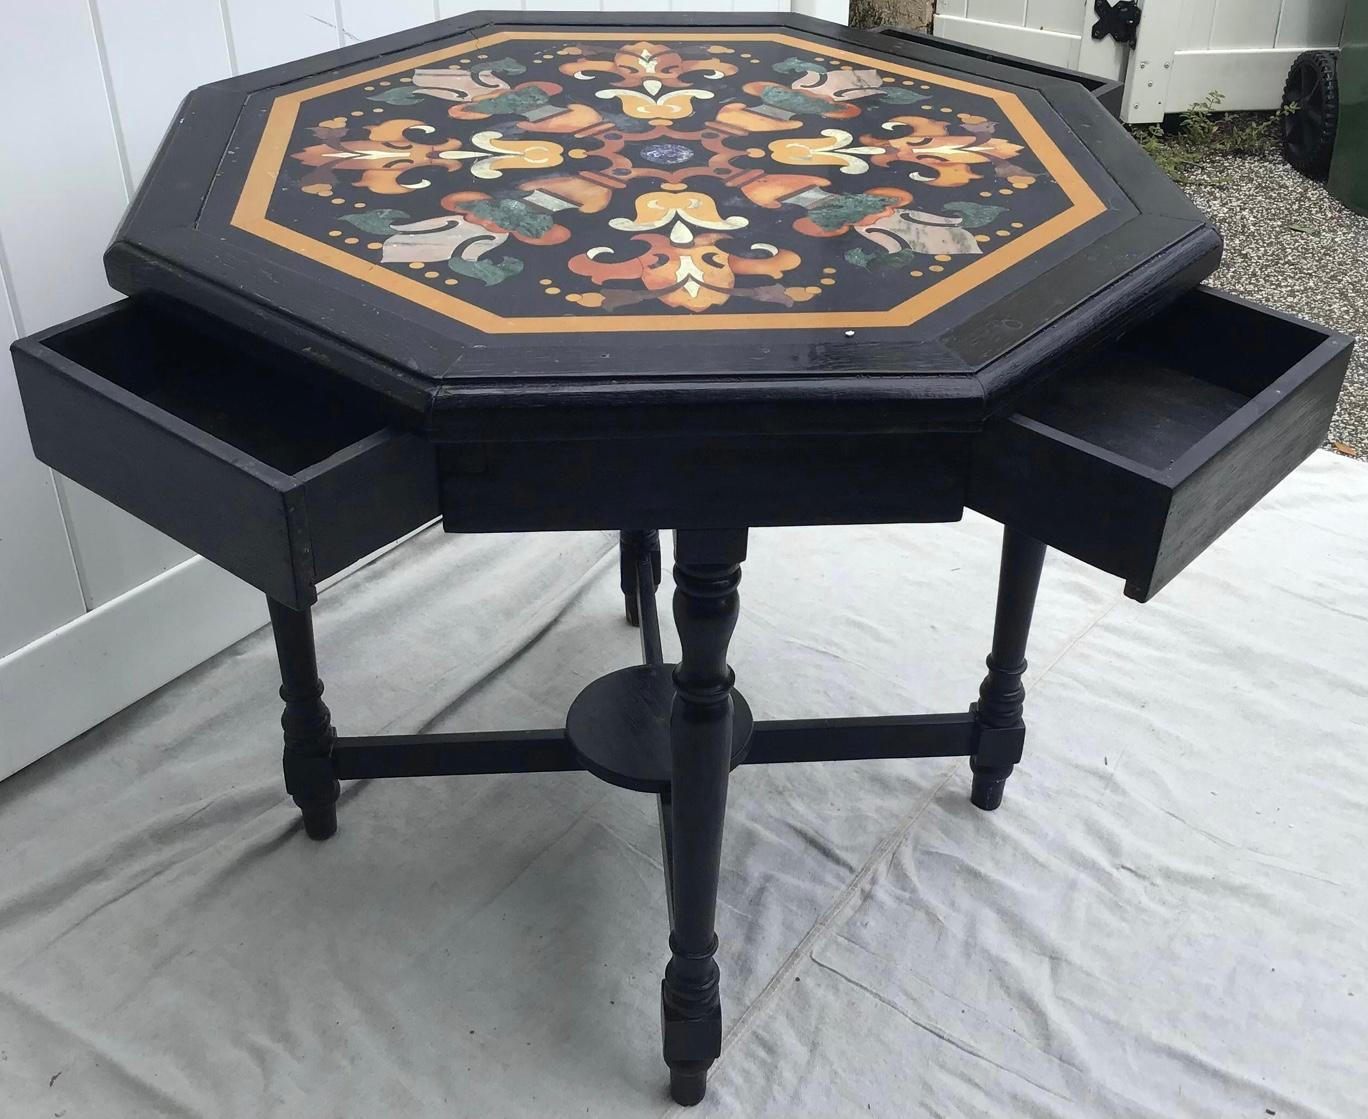 A very fine Italian, 19th century octagonal Pietra dura inlaid table raised on an ebonized base with four drawers. The pietra dura inlaid top depicting a stylized design with colorful marble inlaid pieces including lapis lazuli and color stones, all